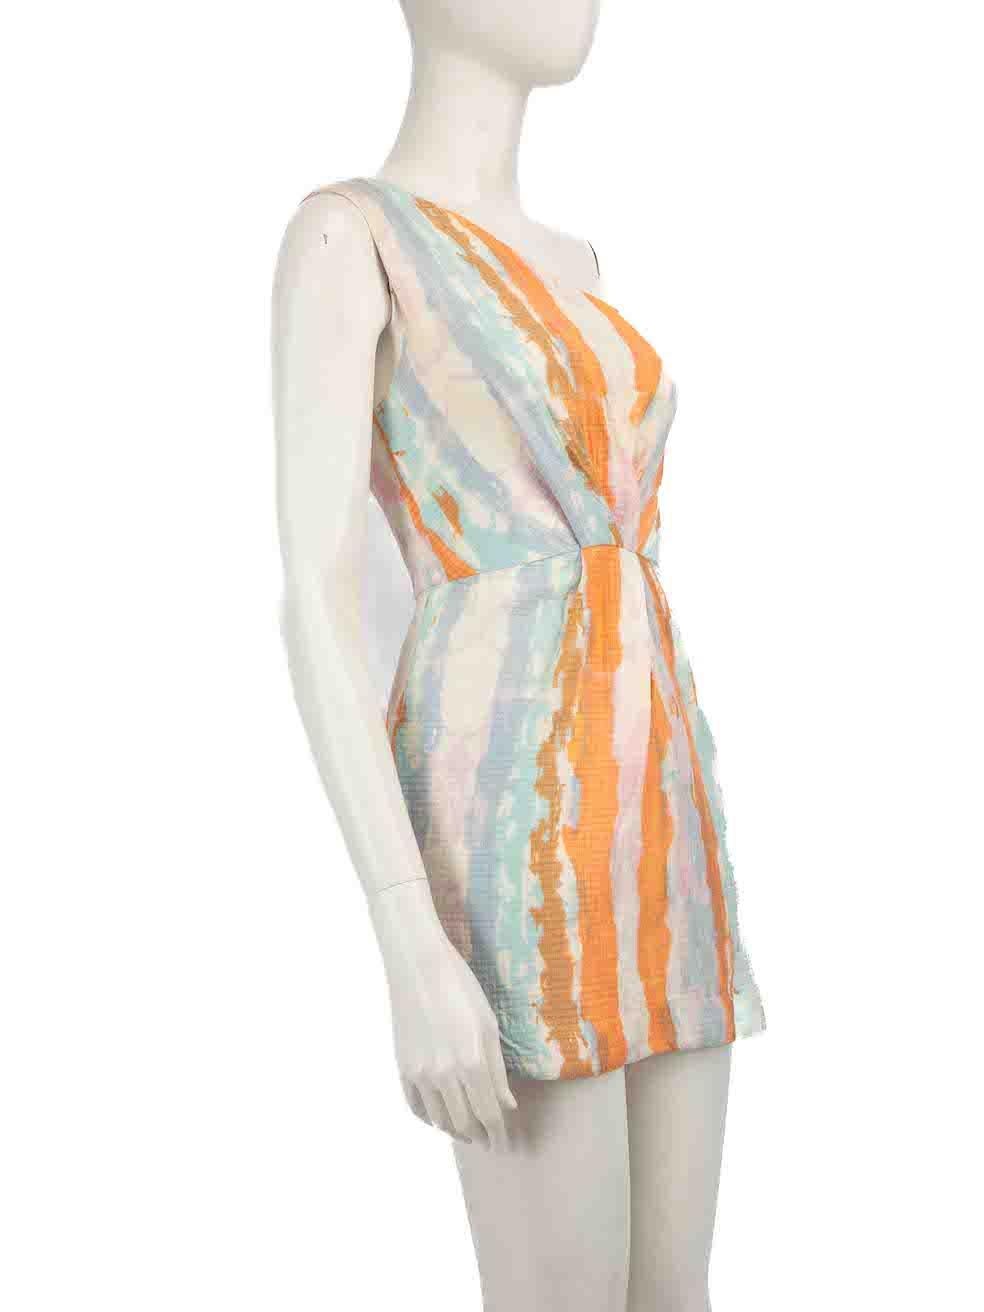 CONDITION is Very good. Minimal wear to dress is evident. There are holes to the weave at the centre front twist and near hem on this used Zimmerman designer resale item.
 
 
 
 Details
 
 
 Multicolour- orange, brown, blue
 
 Silk
 
 Dress
 
